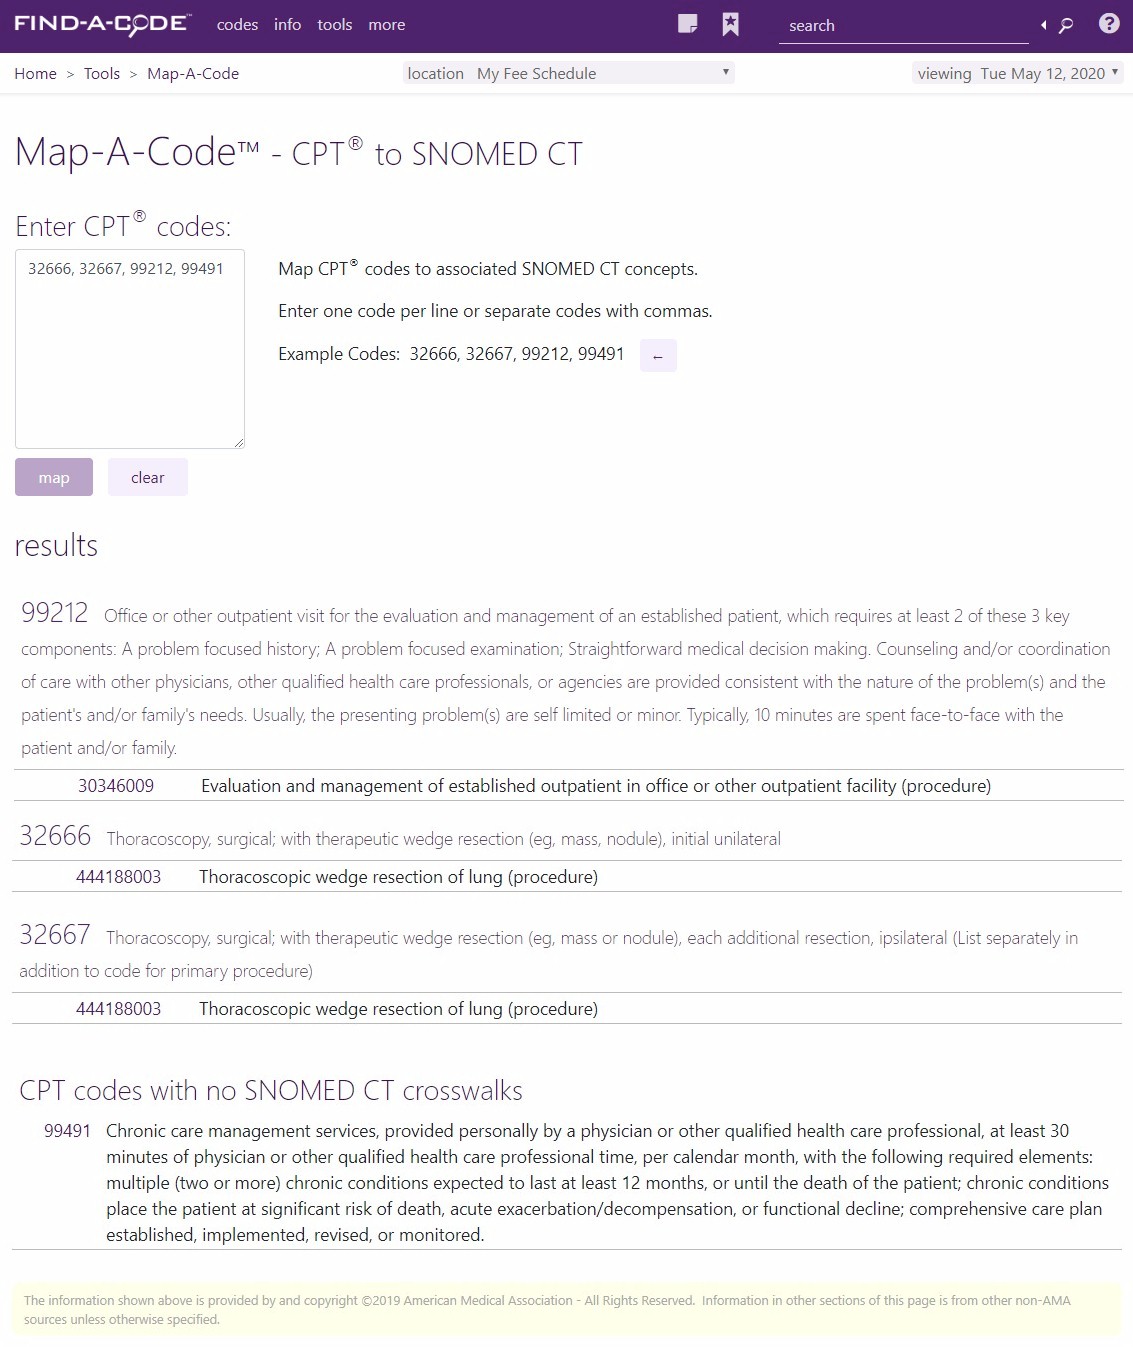 Map-A-Code tool for CPT codes to SNOMED CT crosswalks